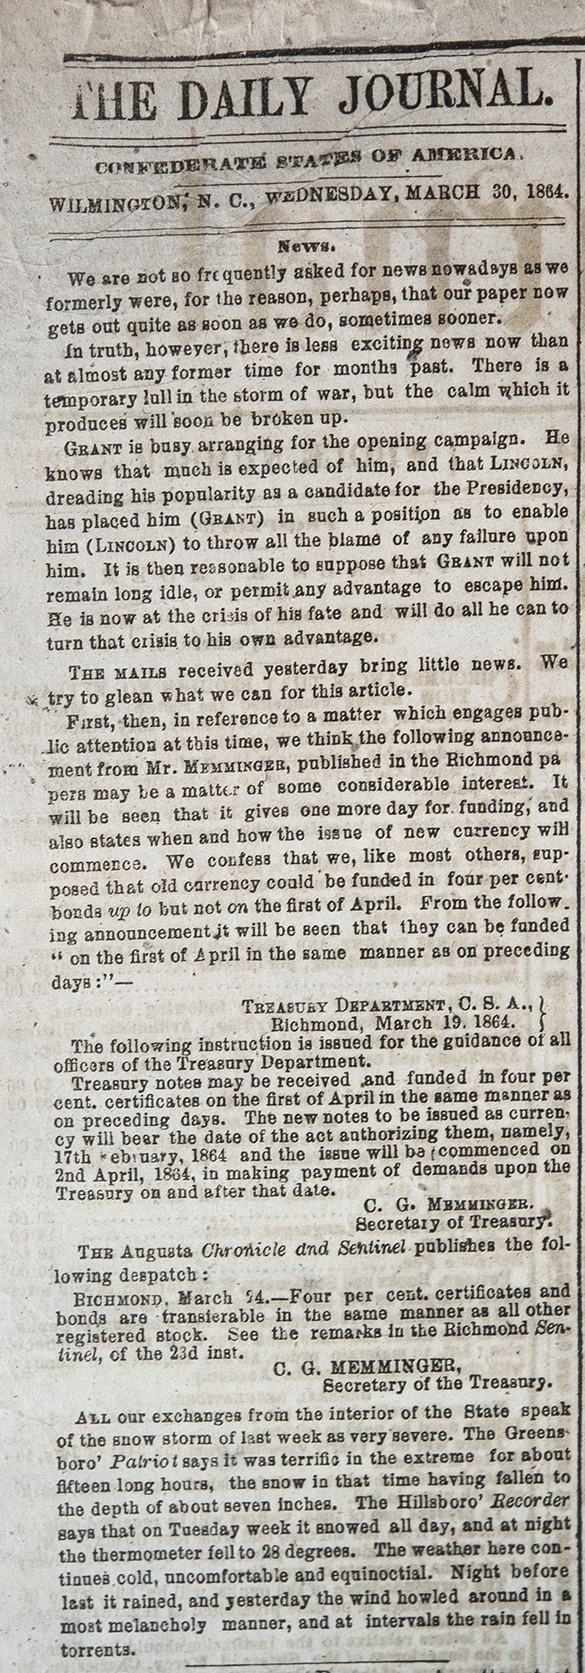 THe Daily Journal (Wilmington, N. C.) 30 March 1864, page 2, column 1.